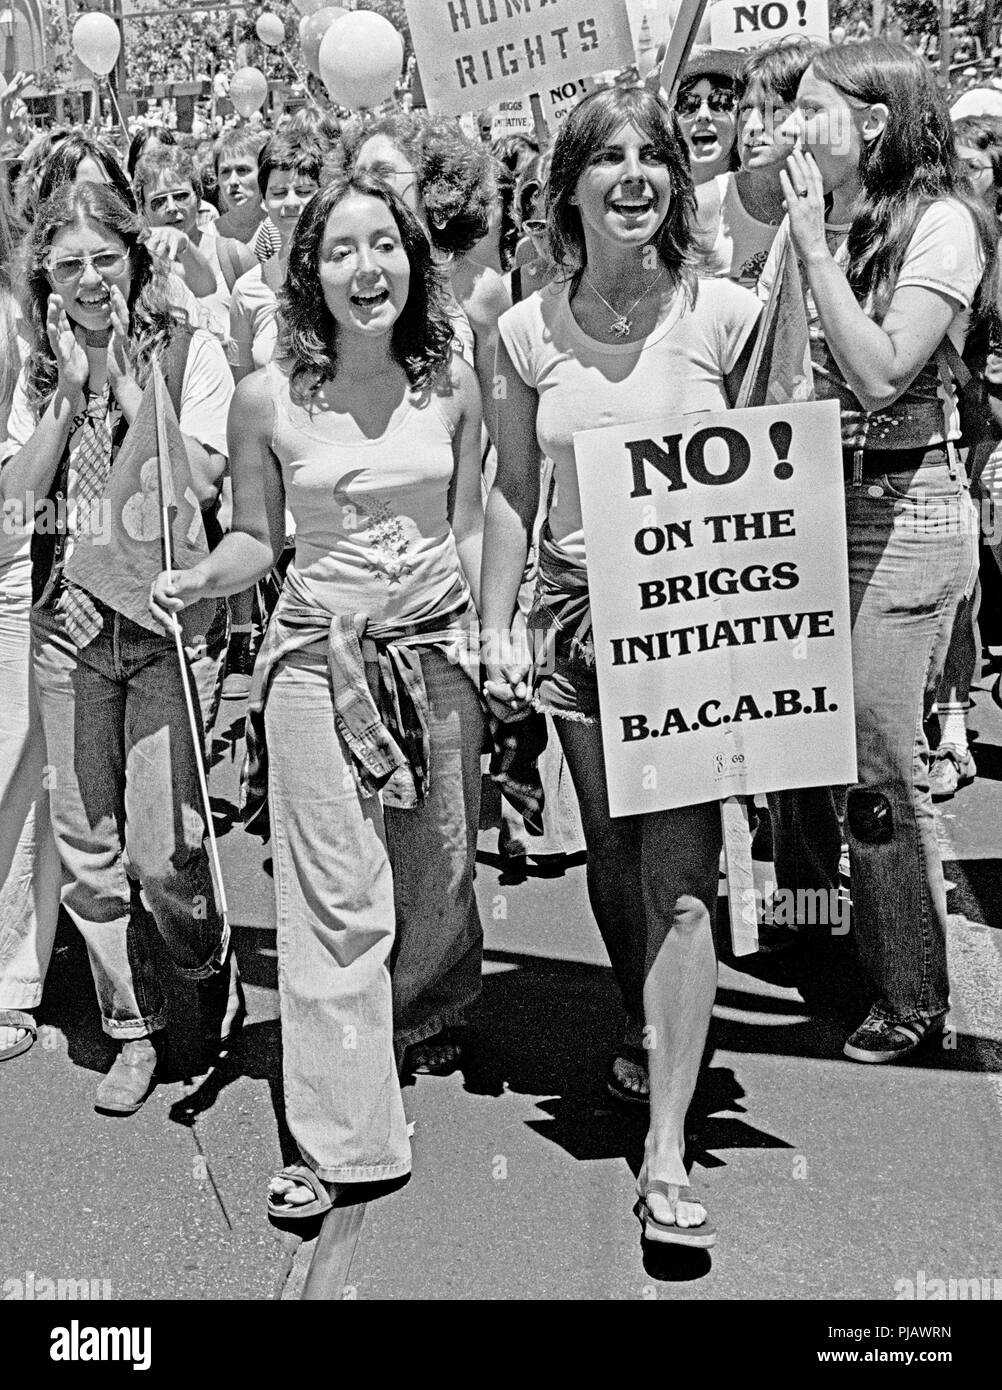 marchers protest against the anti gay Briggs Initiative, Proposition 6, in San Francisco, California in the 1970s Stock Photo